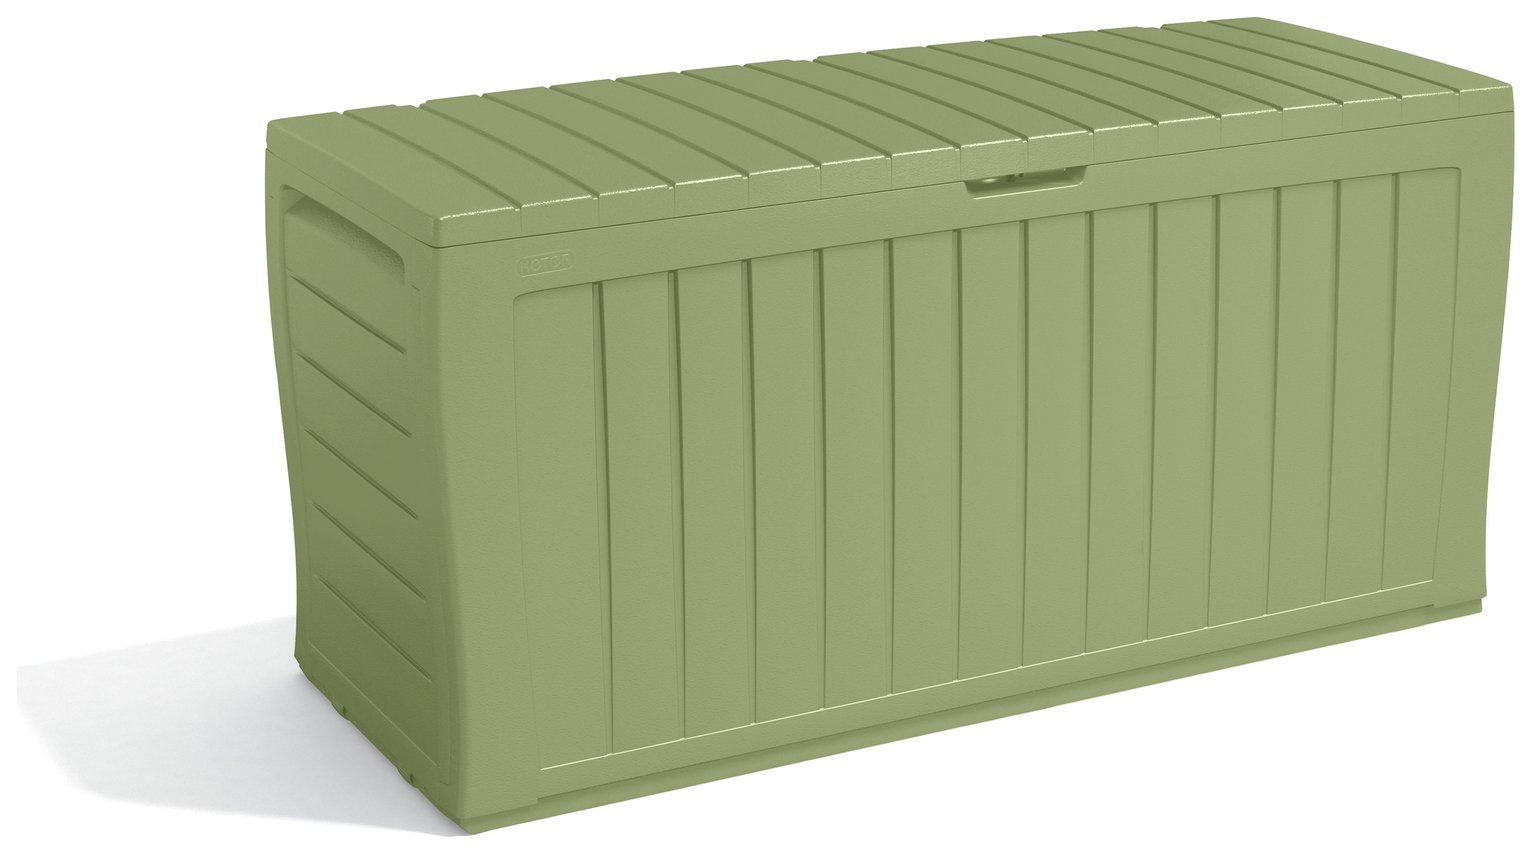 Keter Storage Box | Find It For Less